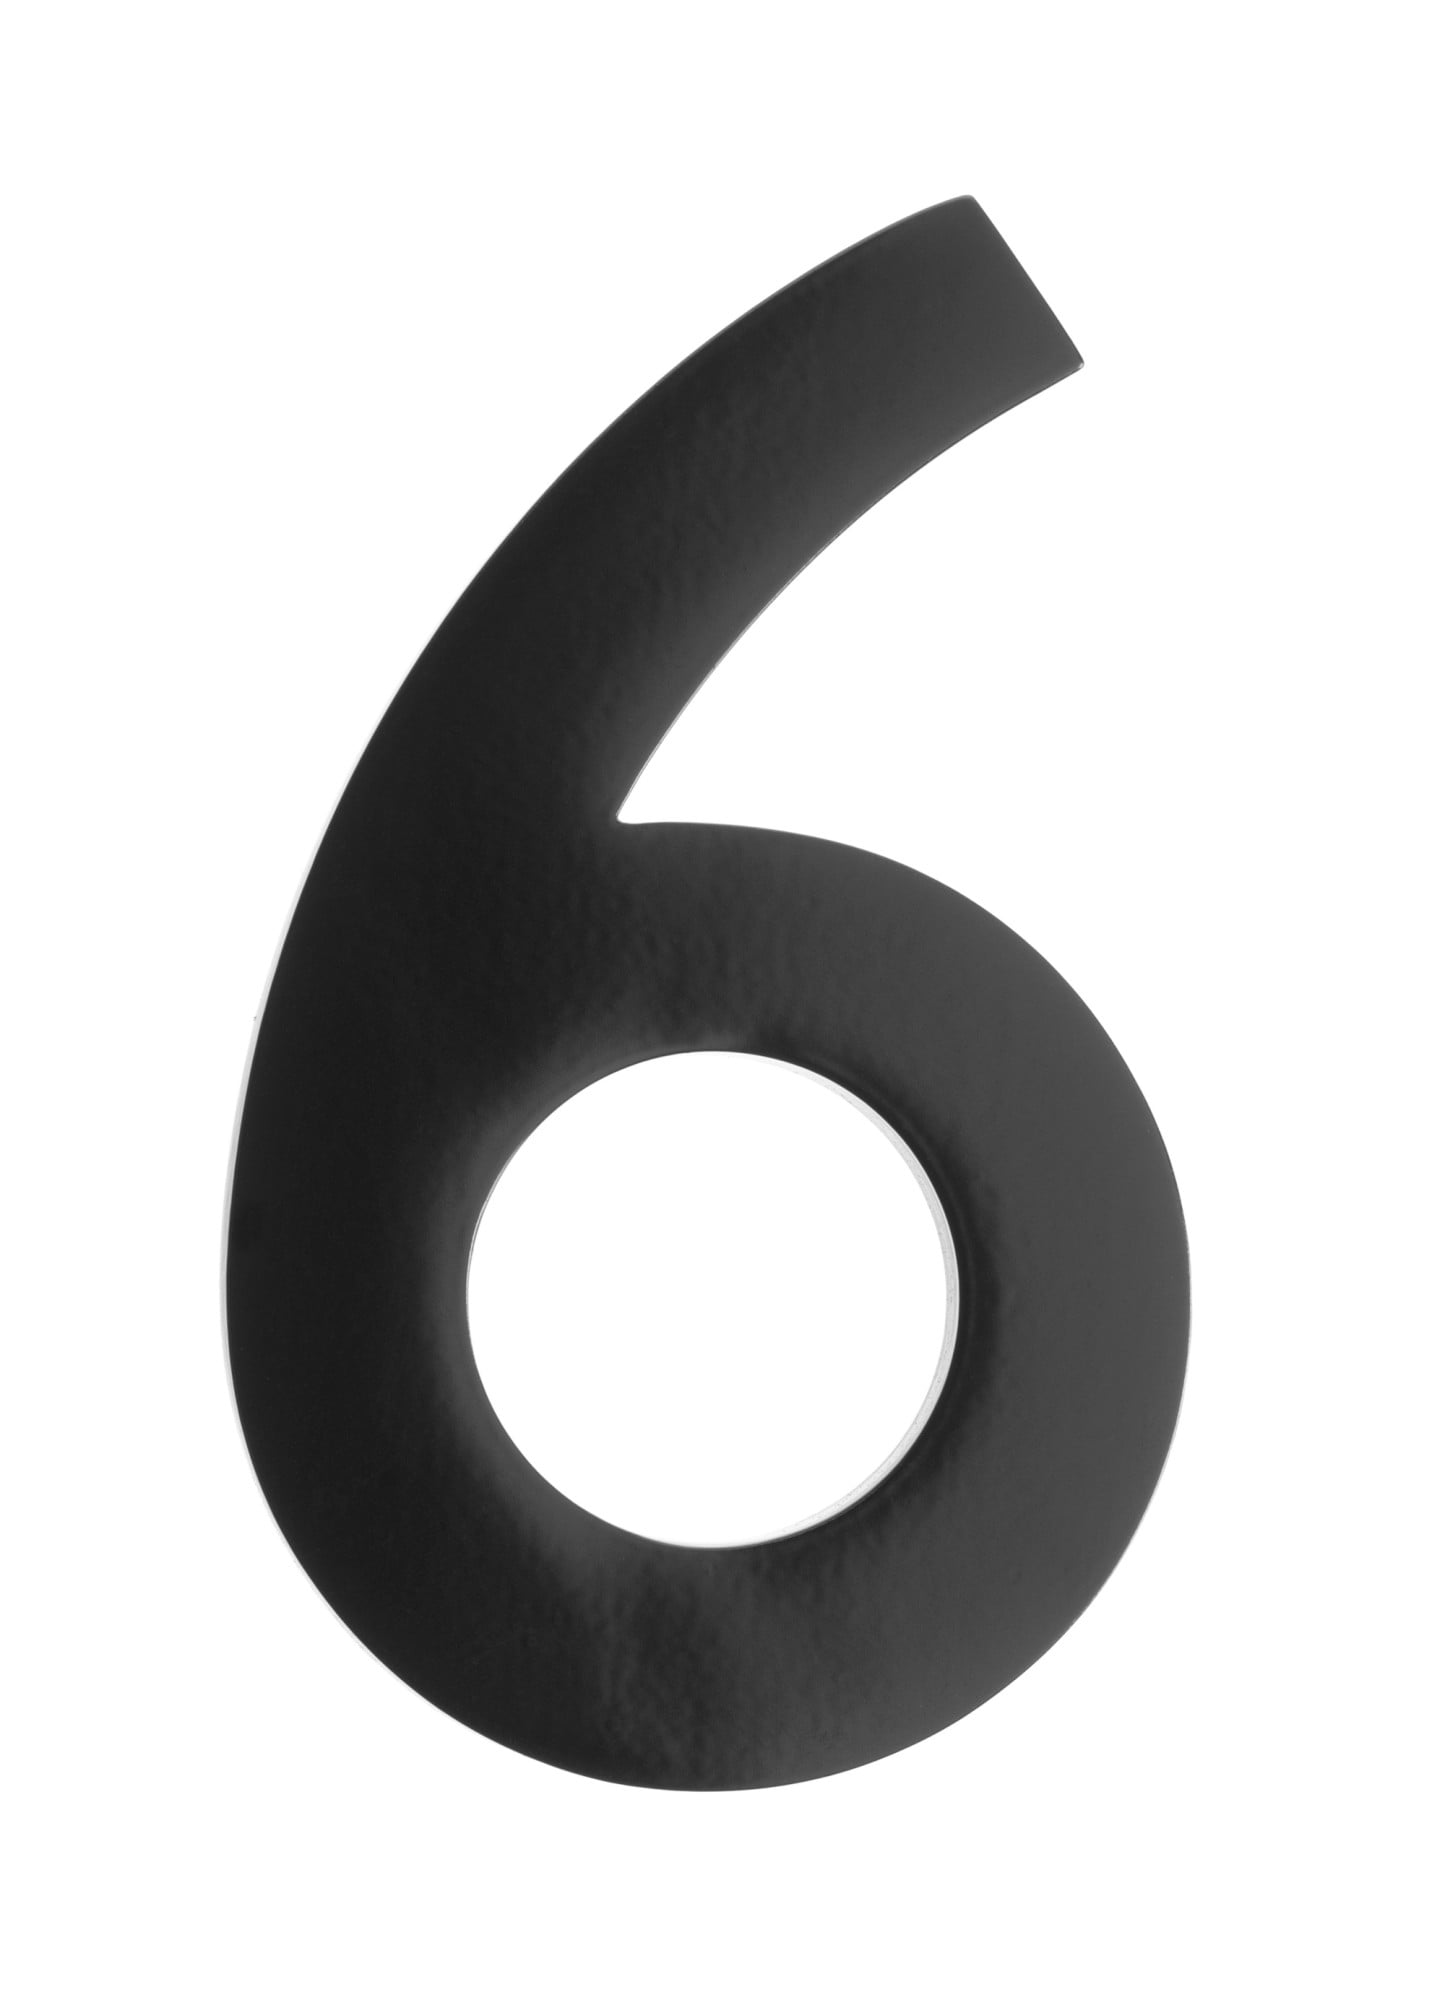 3582b-6 Floating House Number 6, Black - 4 In.